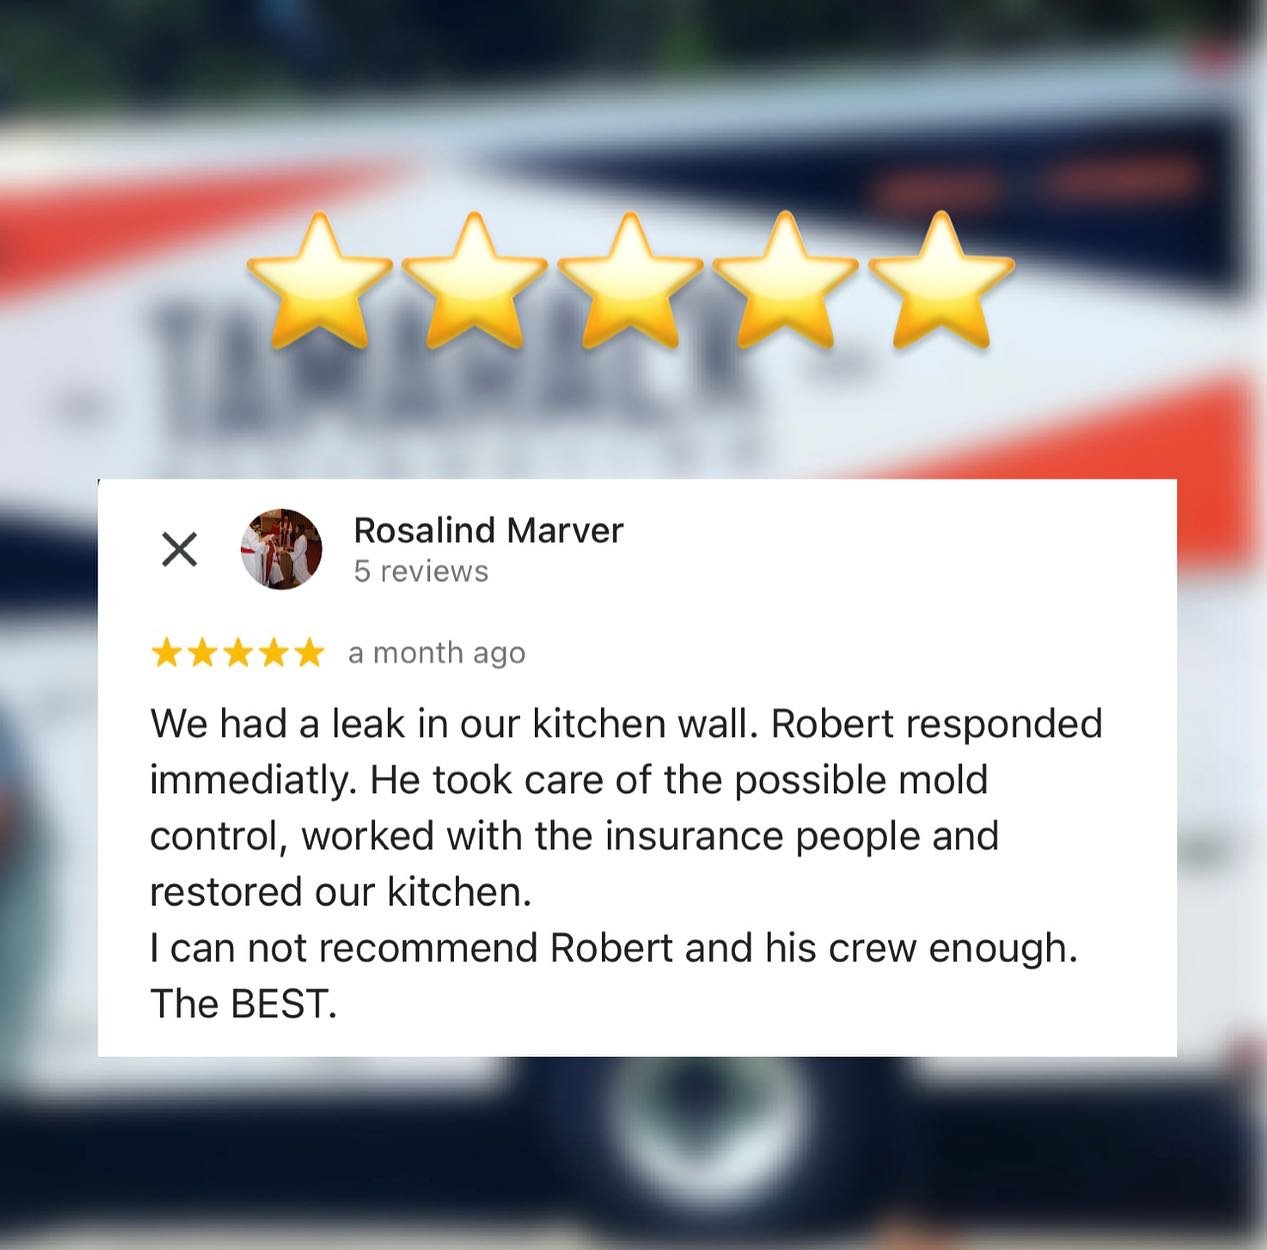 Grateful for the amazing #reviews Thanks for choosing us!! If you or someone you know needs help, call us! 

24/7 🆘 - 📱 760.500.2211
.
.
.
#waterdamagerestoration #moldremoval #customerservice #carlsbadsmallbusiness #familyowned #iicrccertified #em